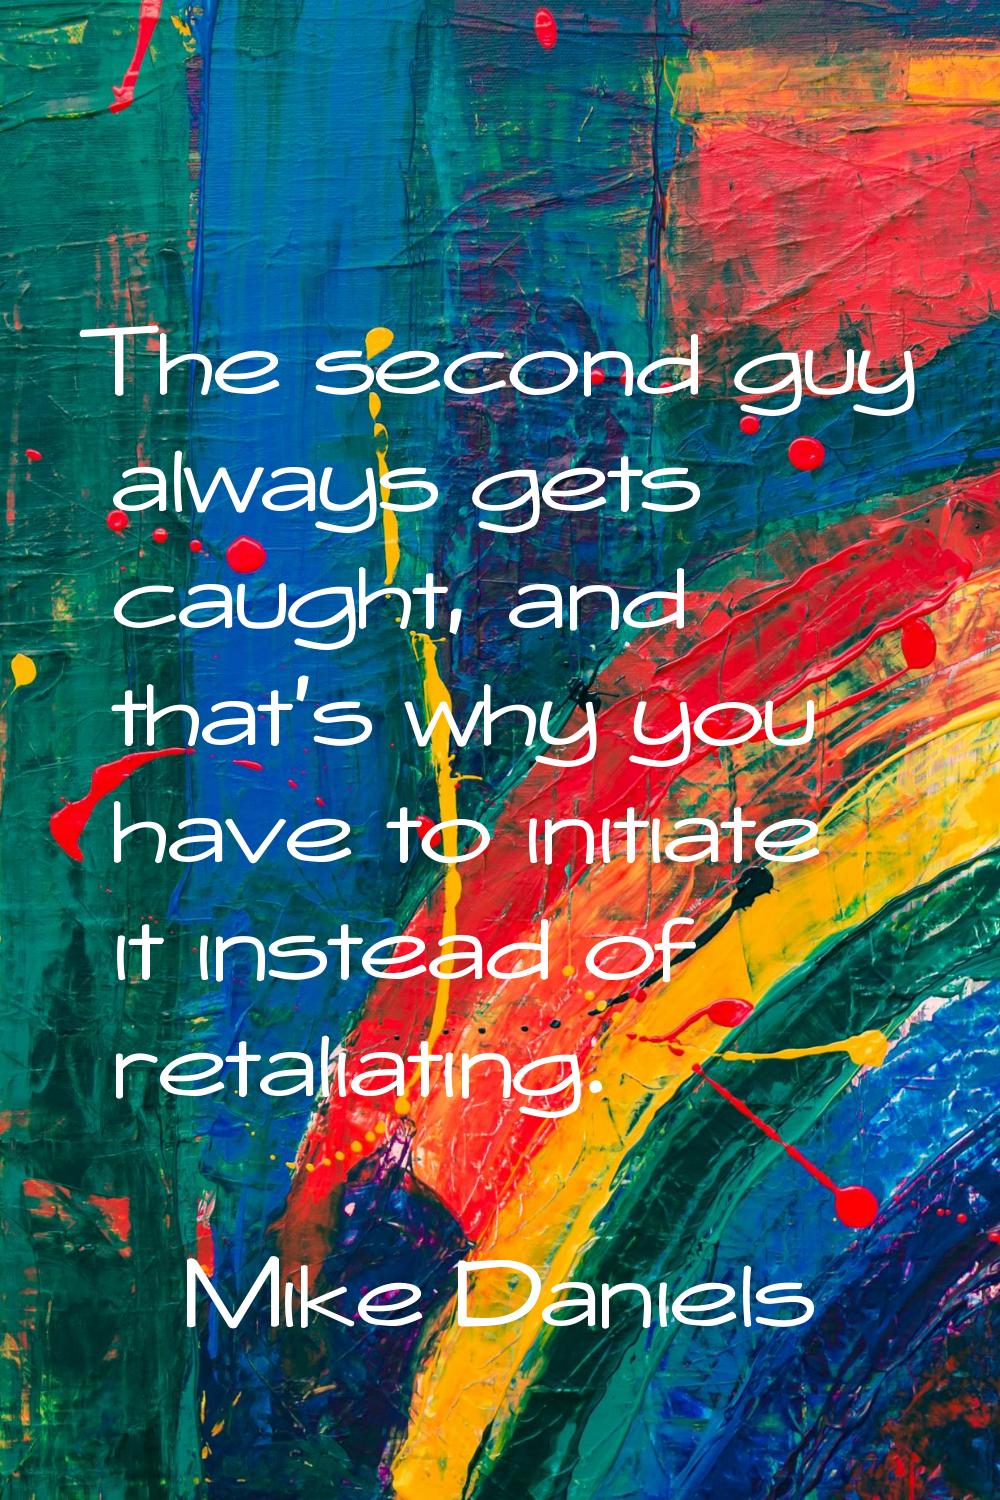 The second guy always gets caught, and that's why you have to initiate it instead of retaliating.